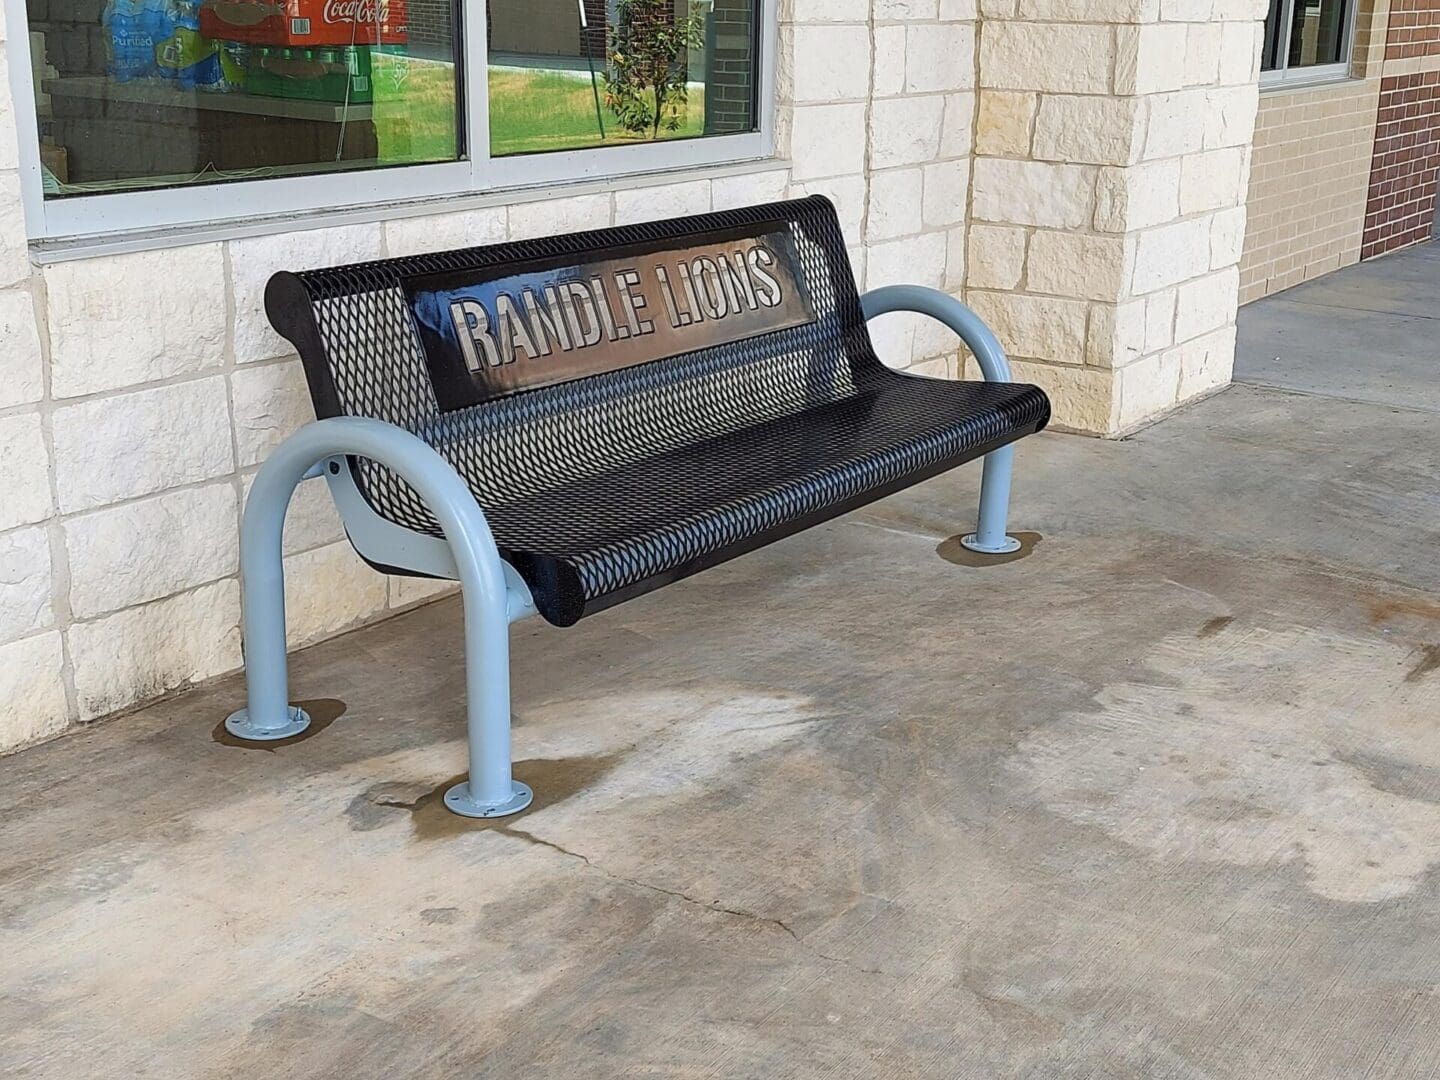 A bench that is sitting on the sidewalk.